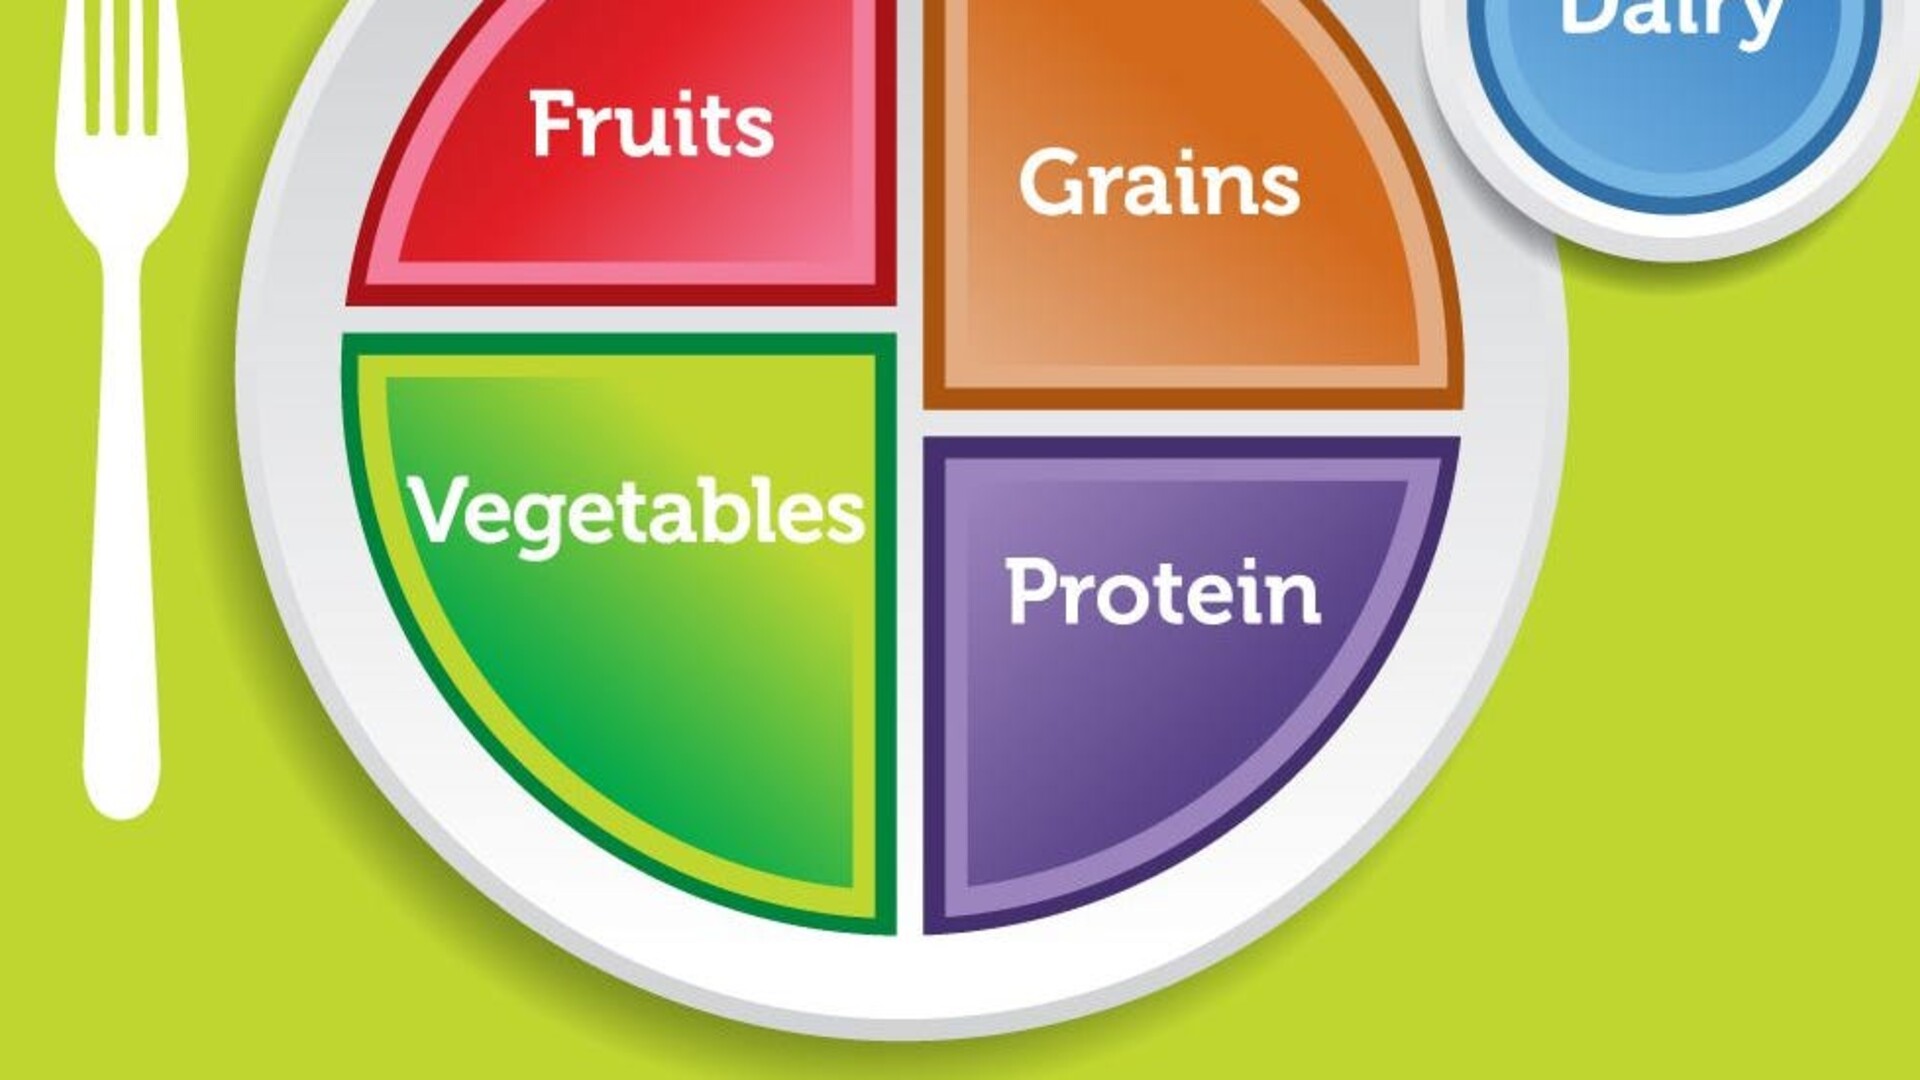 Imagine Walnuts Being on the USDA MyPlate Recommendations